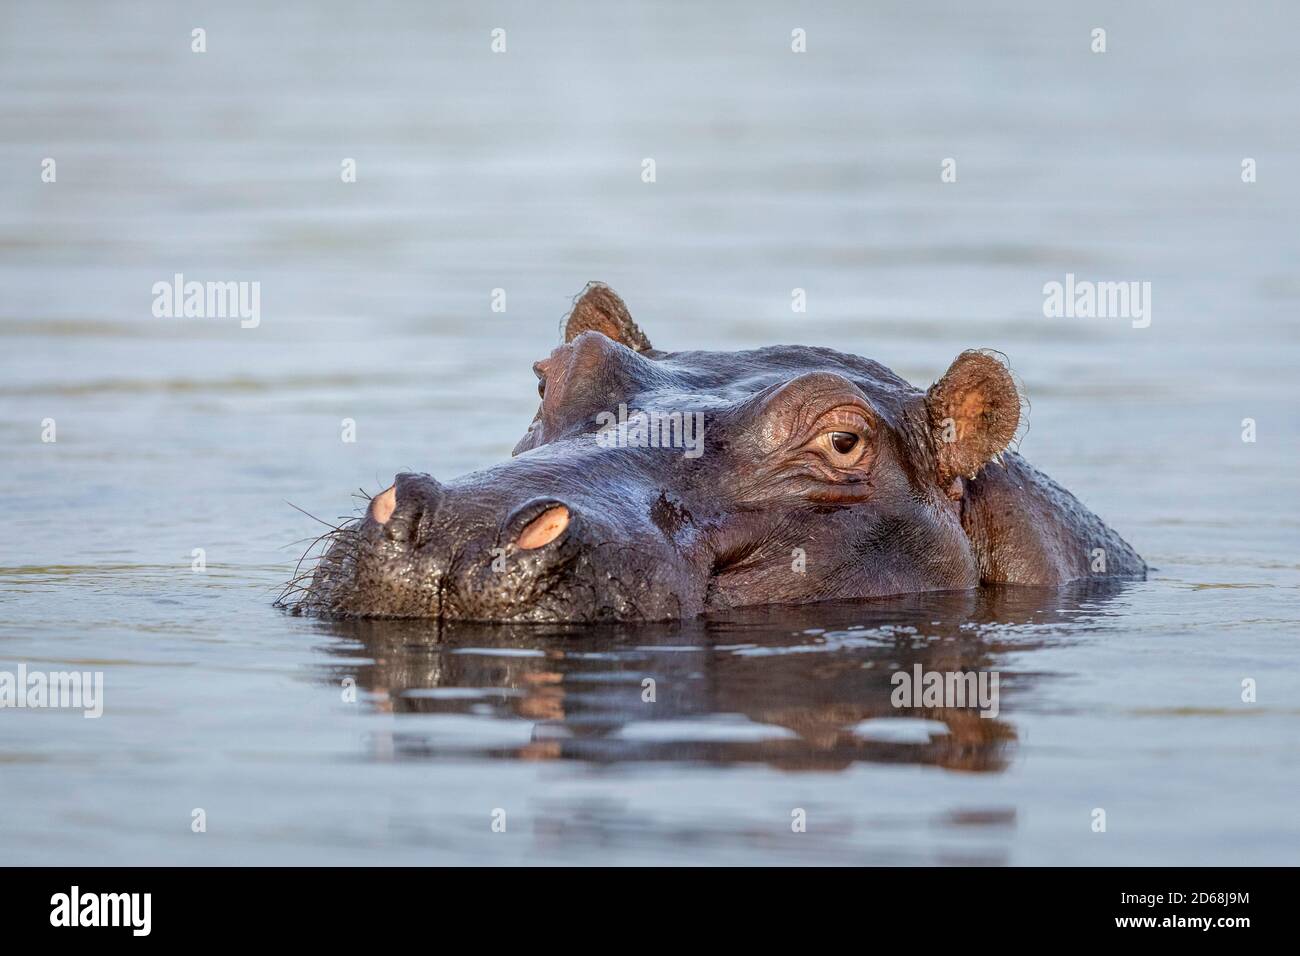 Close up on hippo's head sticking out of water in Chobe River in Botswana Stock Photo